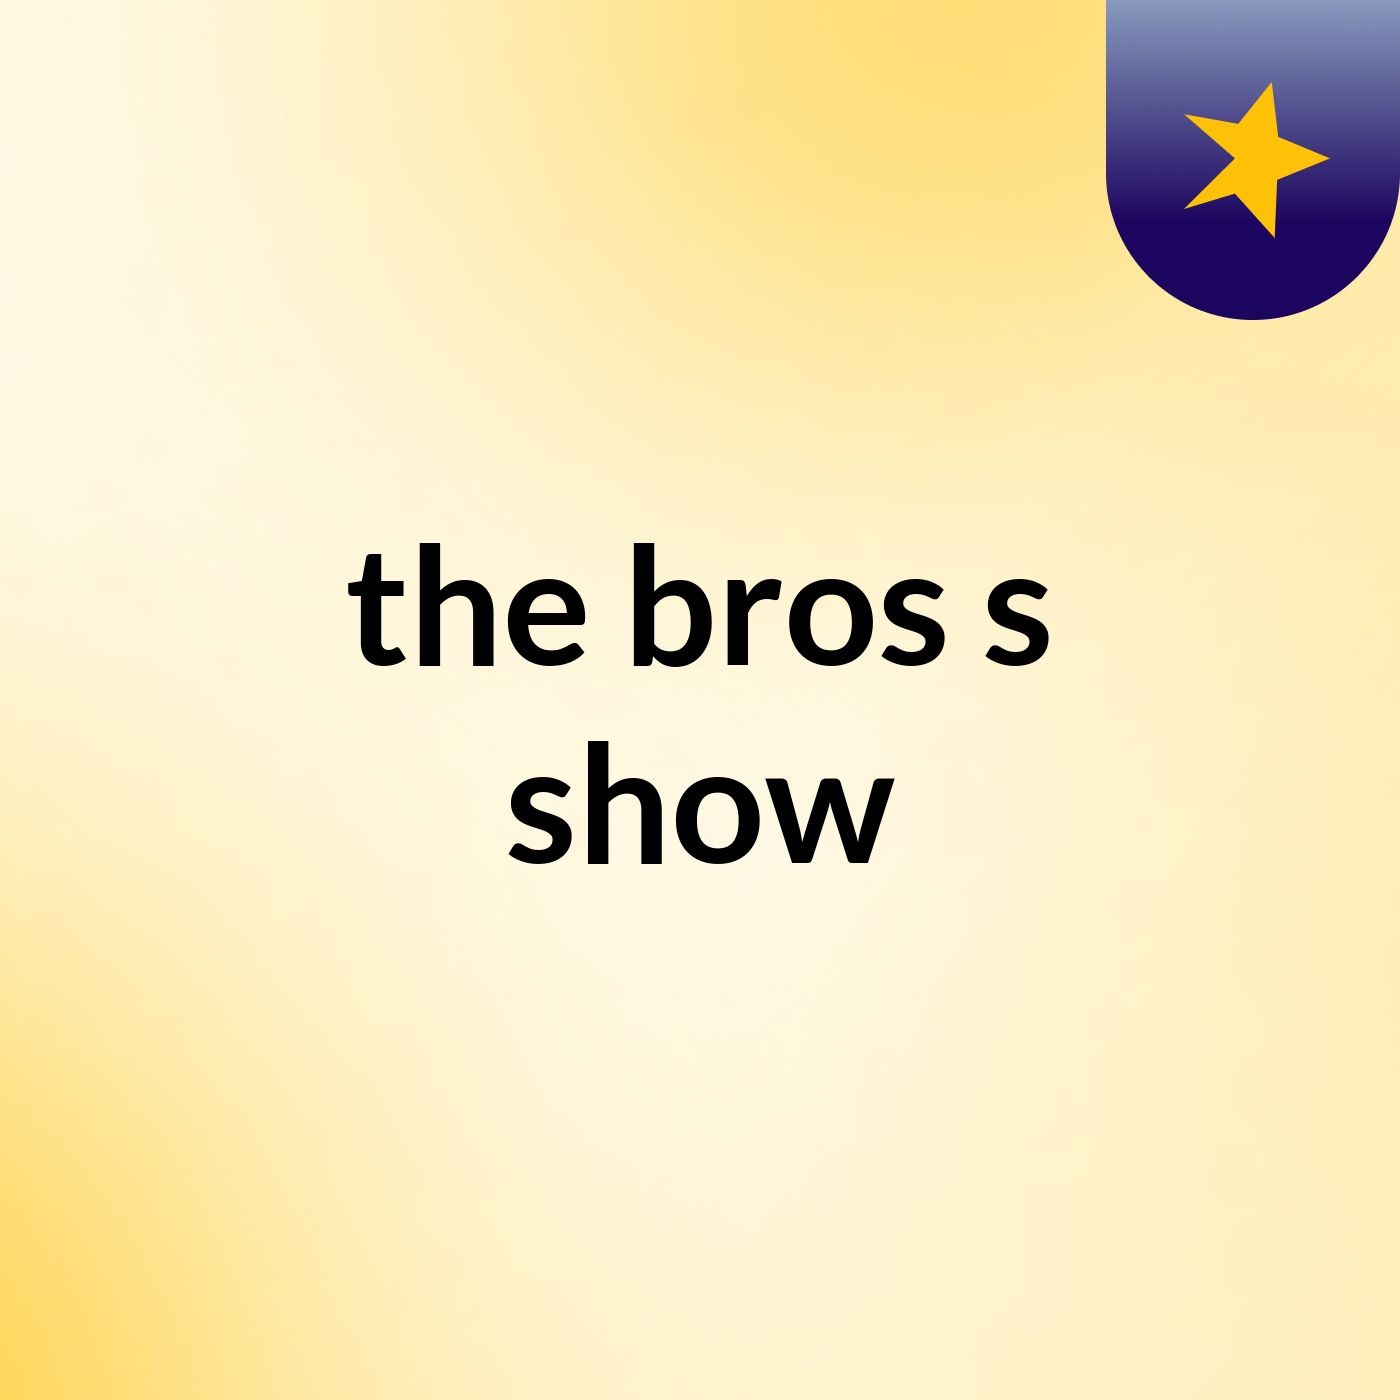 the bros's show